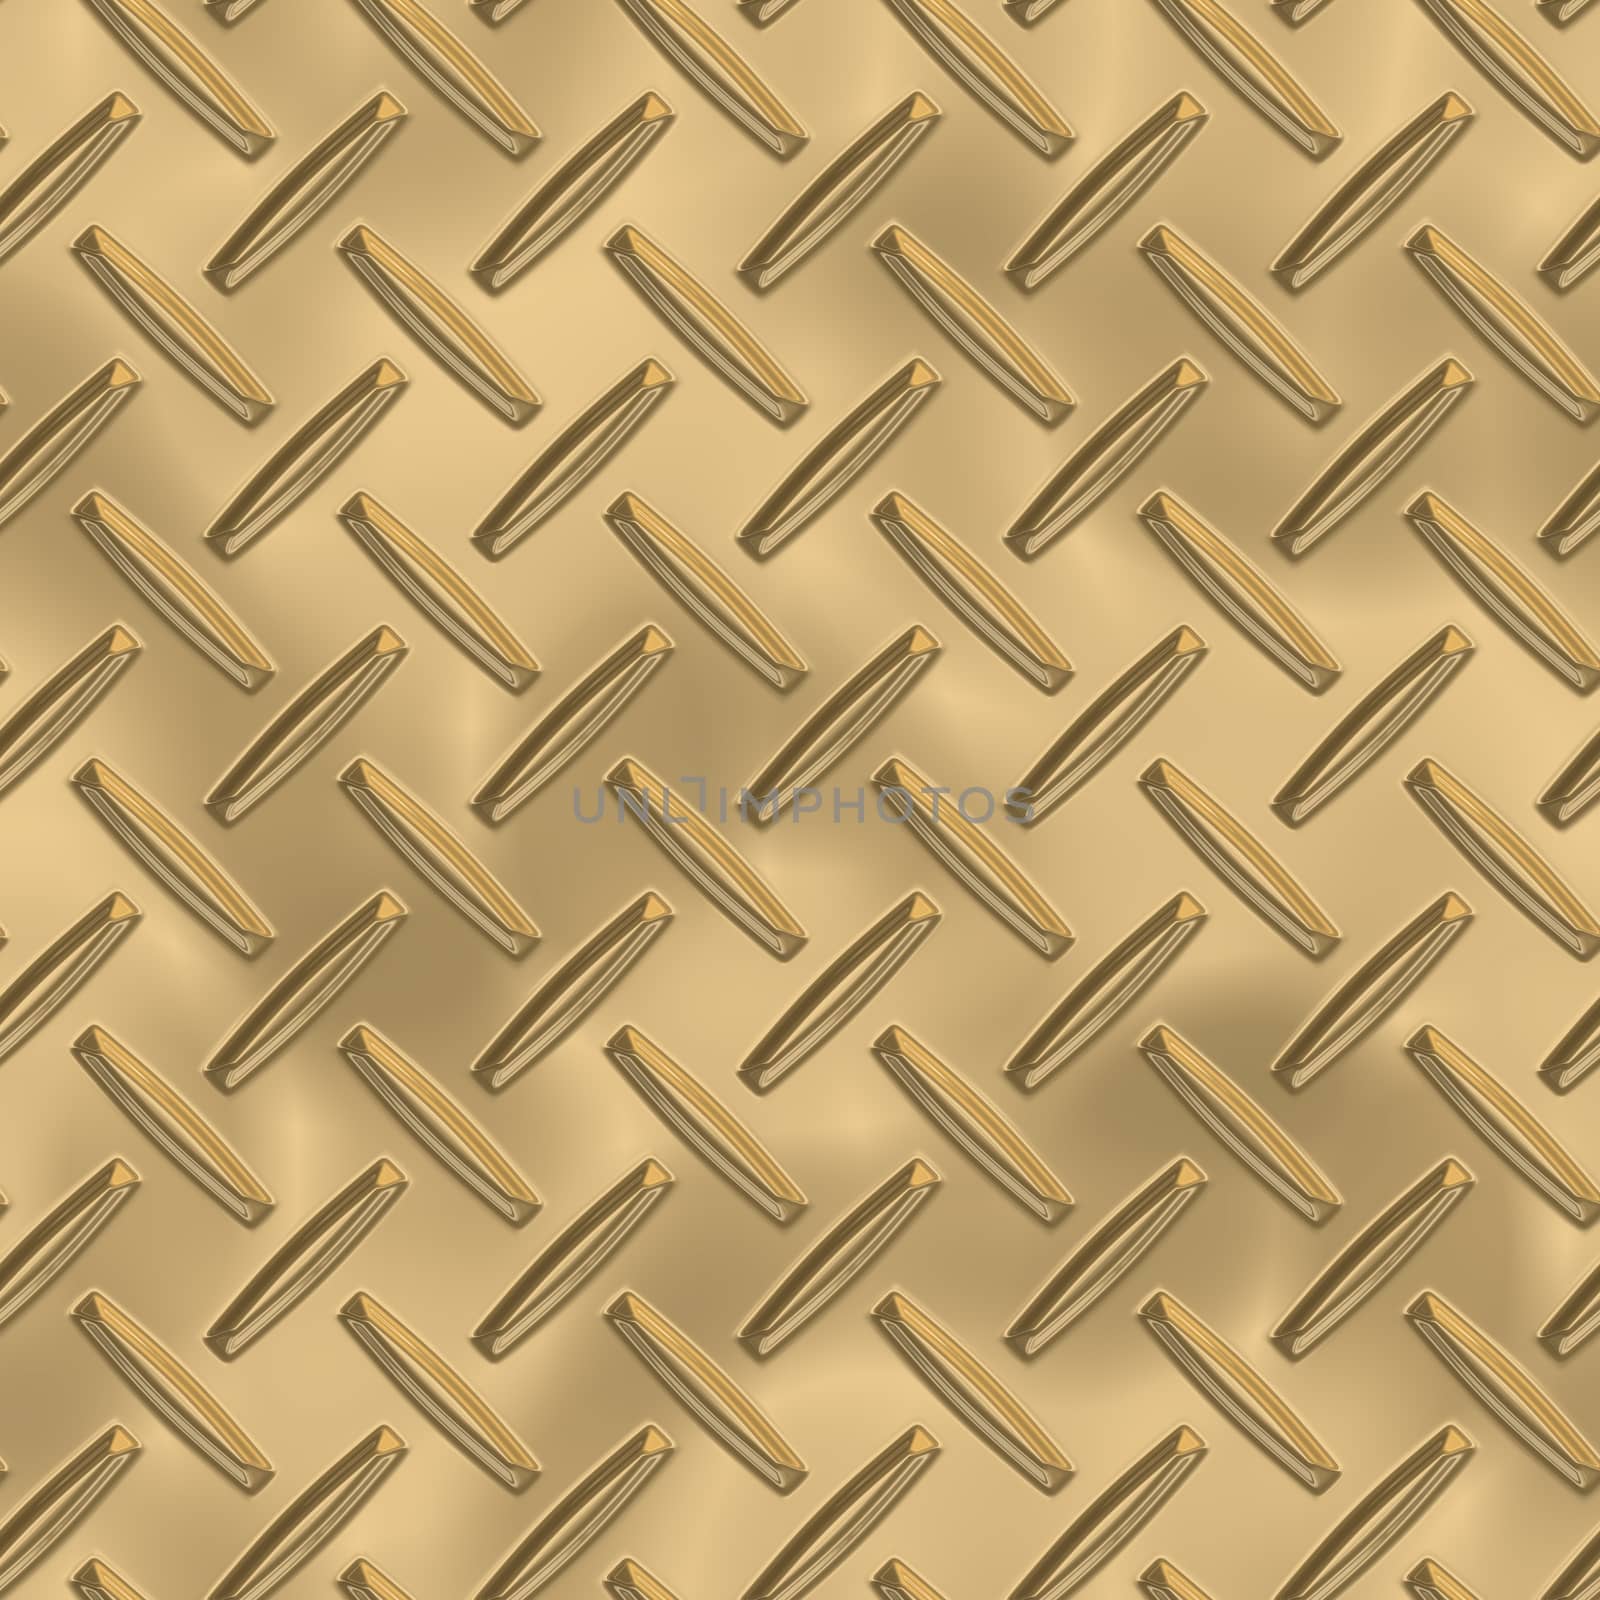 Brass Metal Plate Seamless Texture by whitechild